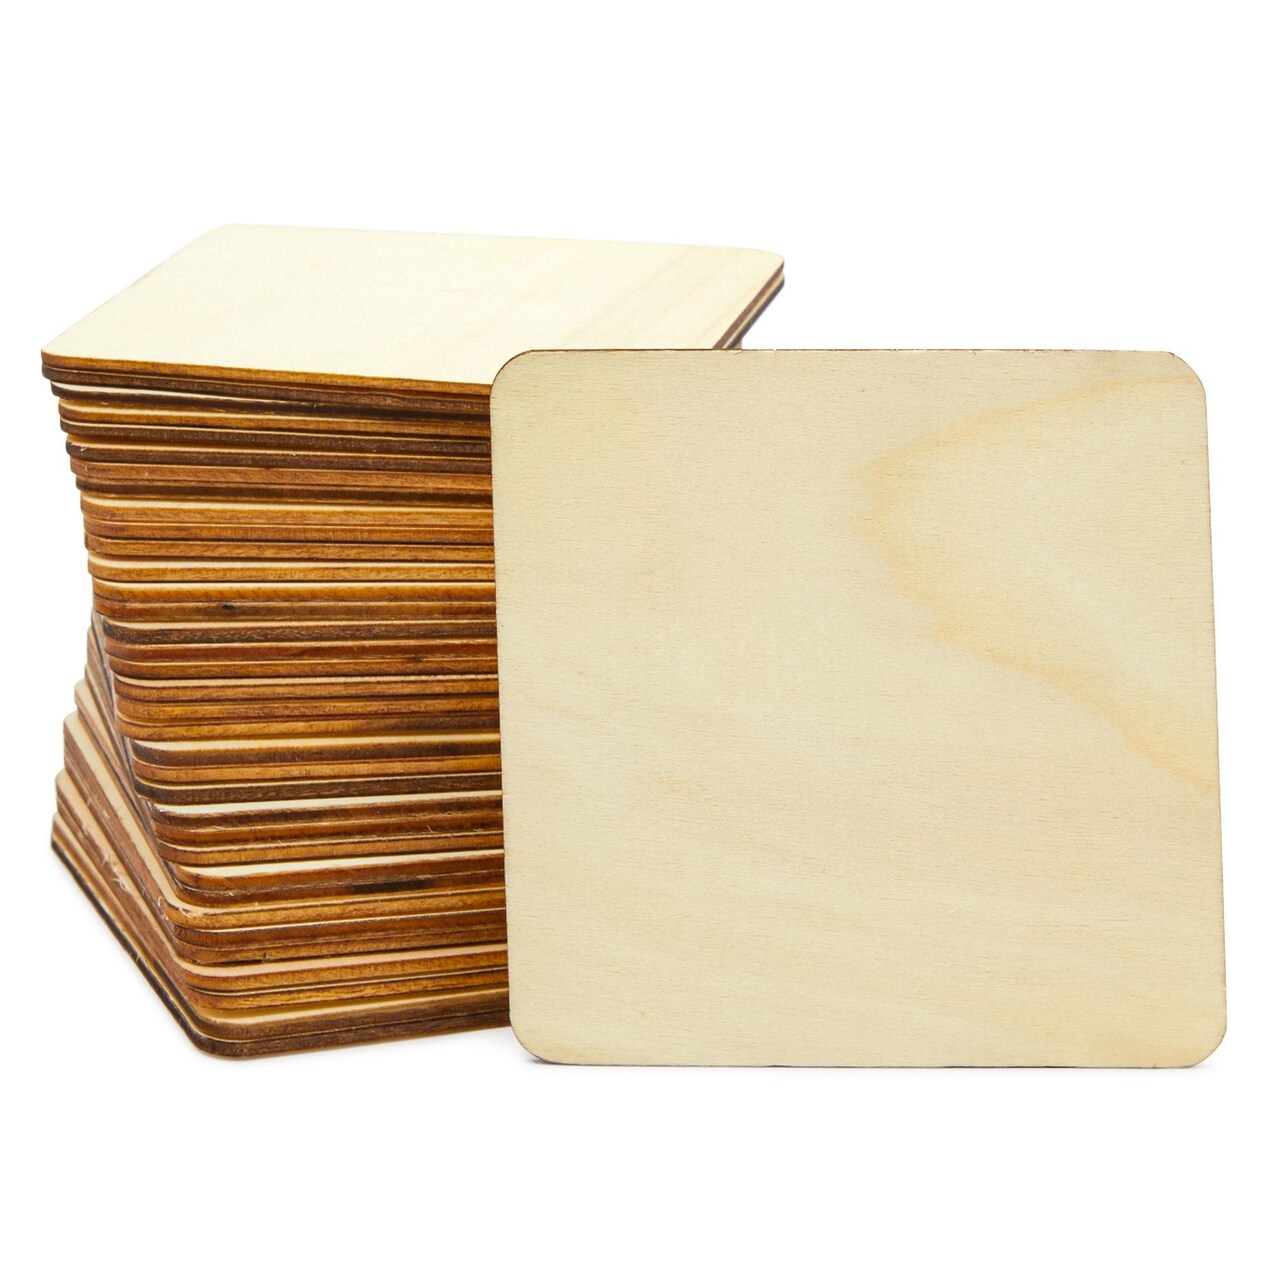 4x4 Wooden Squares for Crafts, Unfinished Wood Cutouts with Rounded Corners  for DIY Coasters (36 Pack)